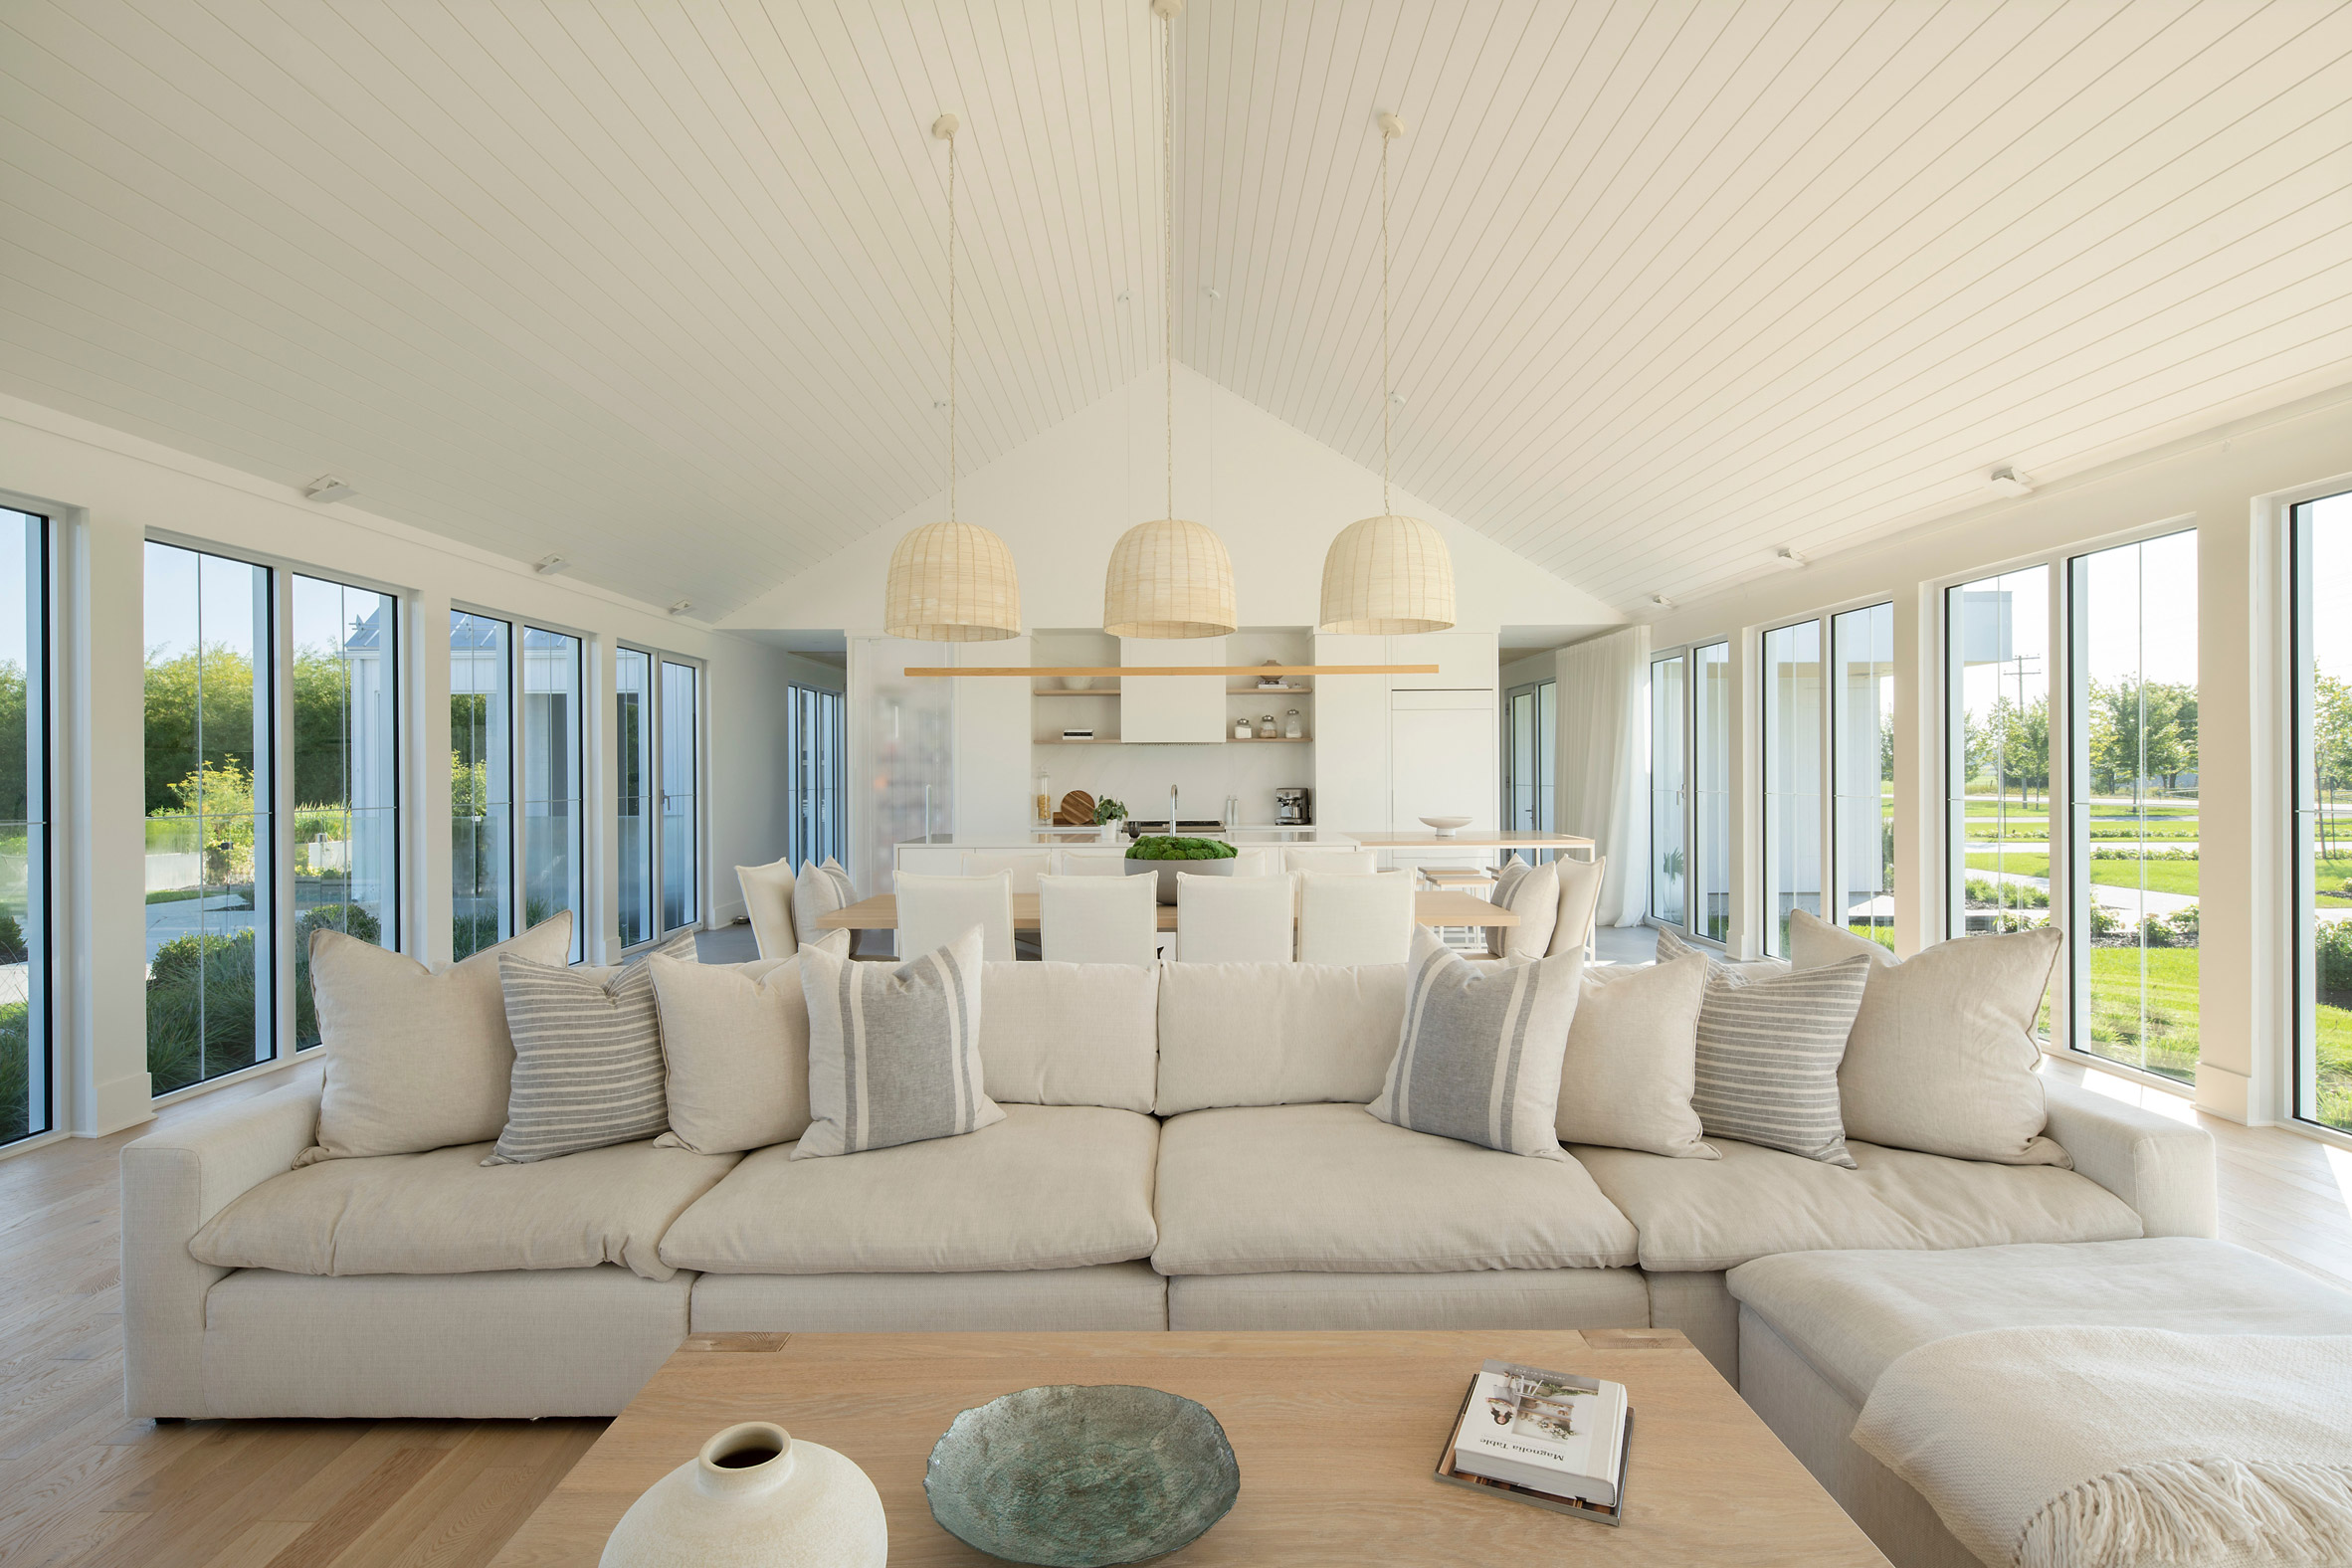 A living room with a pitched ceilings, white sofa with cushions and timber floors